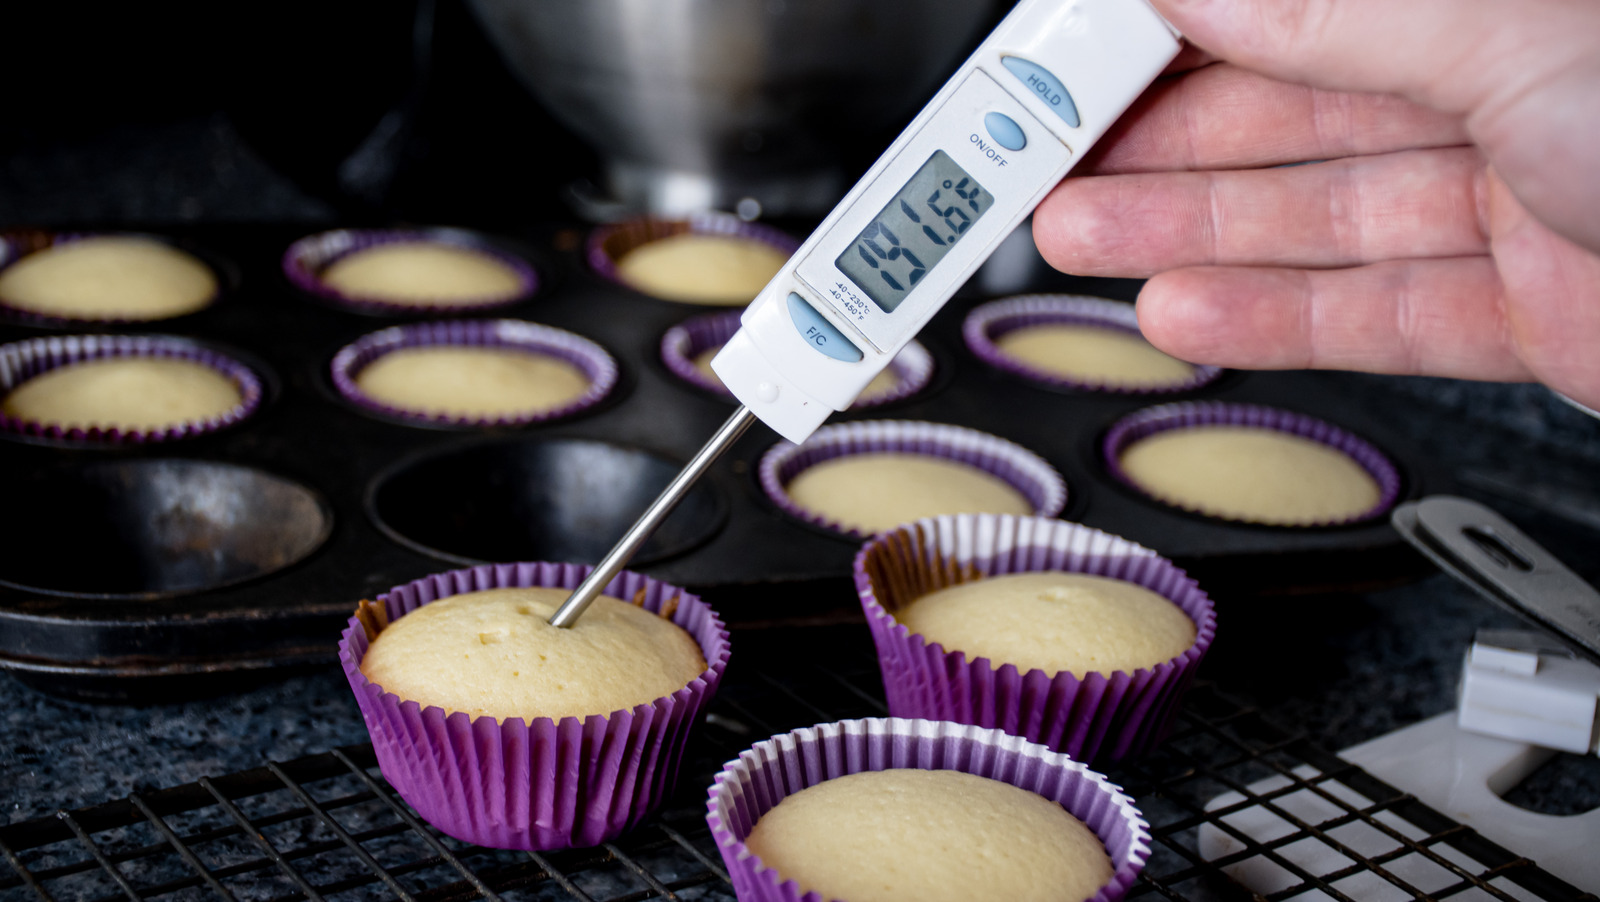 Baking Is Even Easier With A Meat Thermometer On Hand